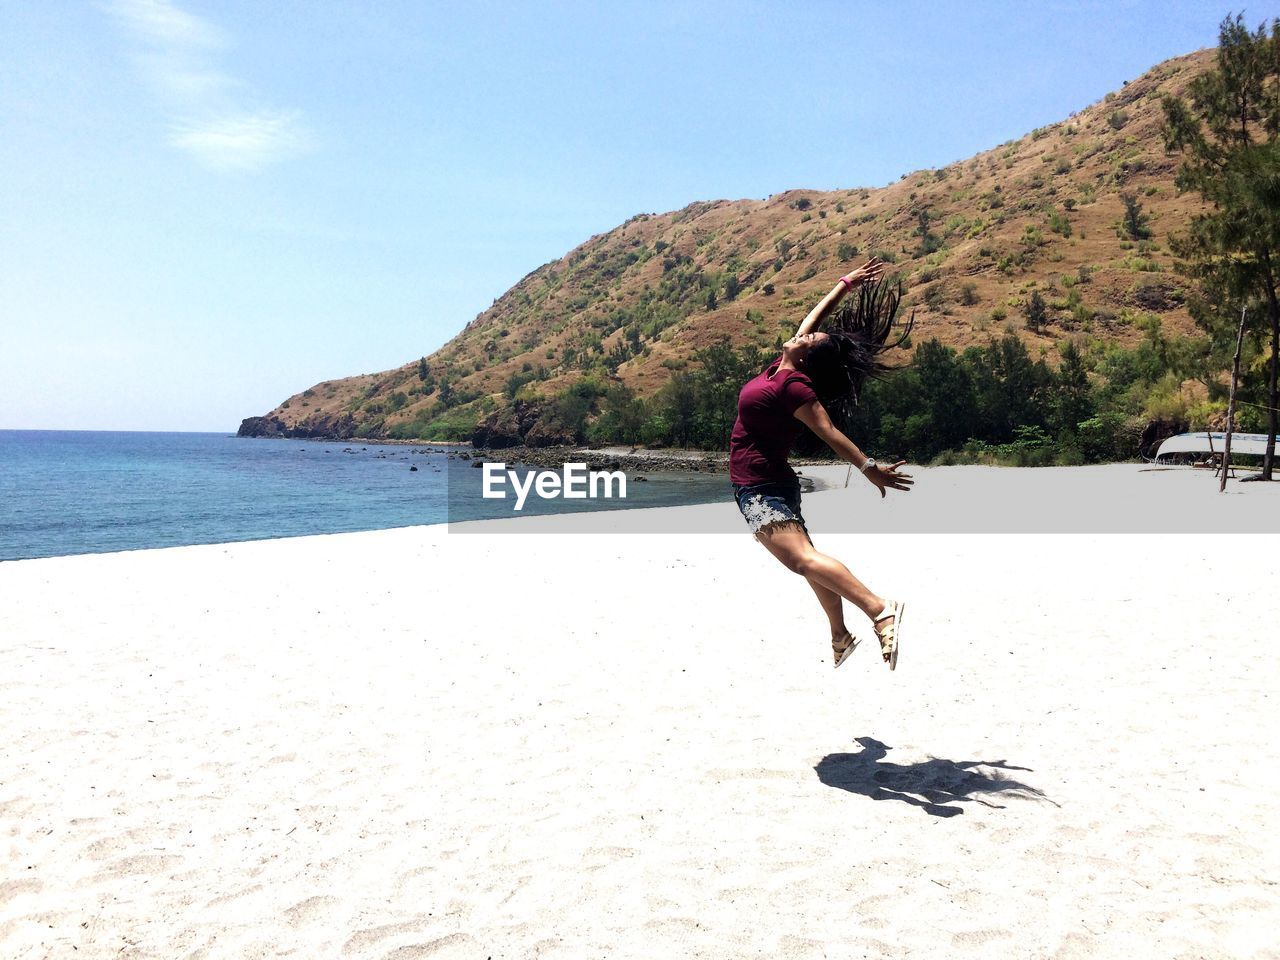 Woman jumping on sand by mountain at beach